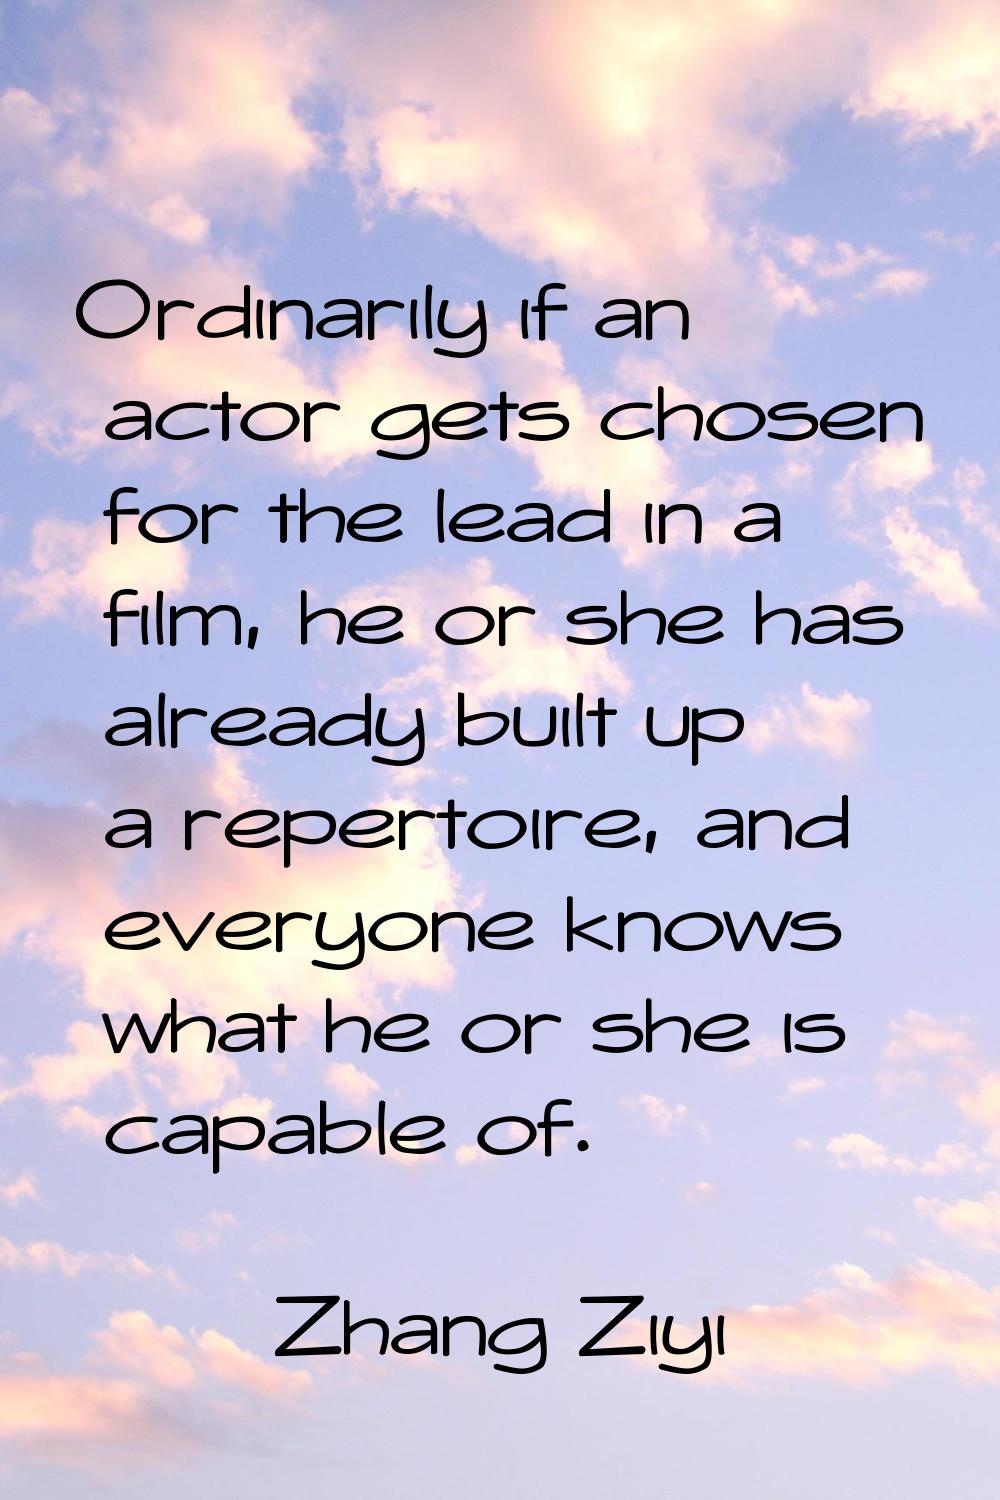 Ordinarily if an actor gets chosen for the lead in a film, he or she has already built up a reperto